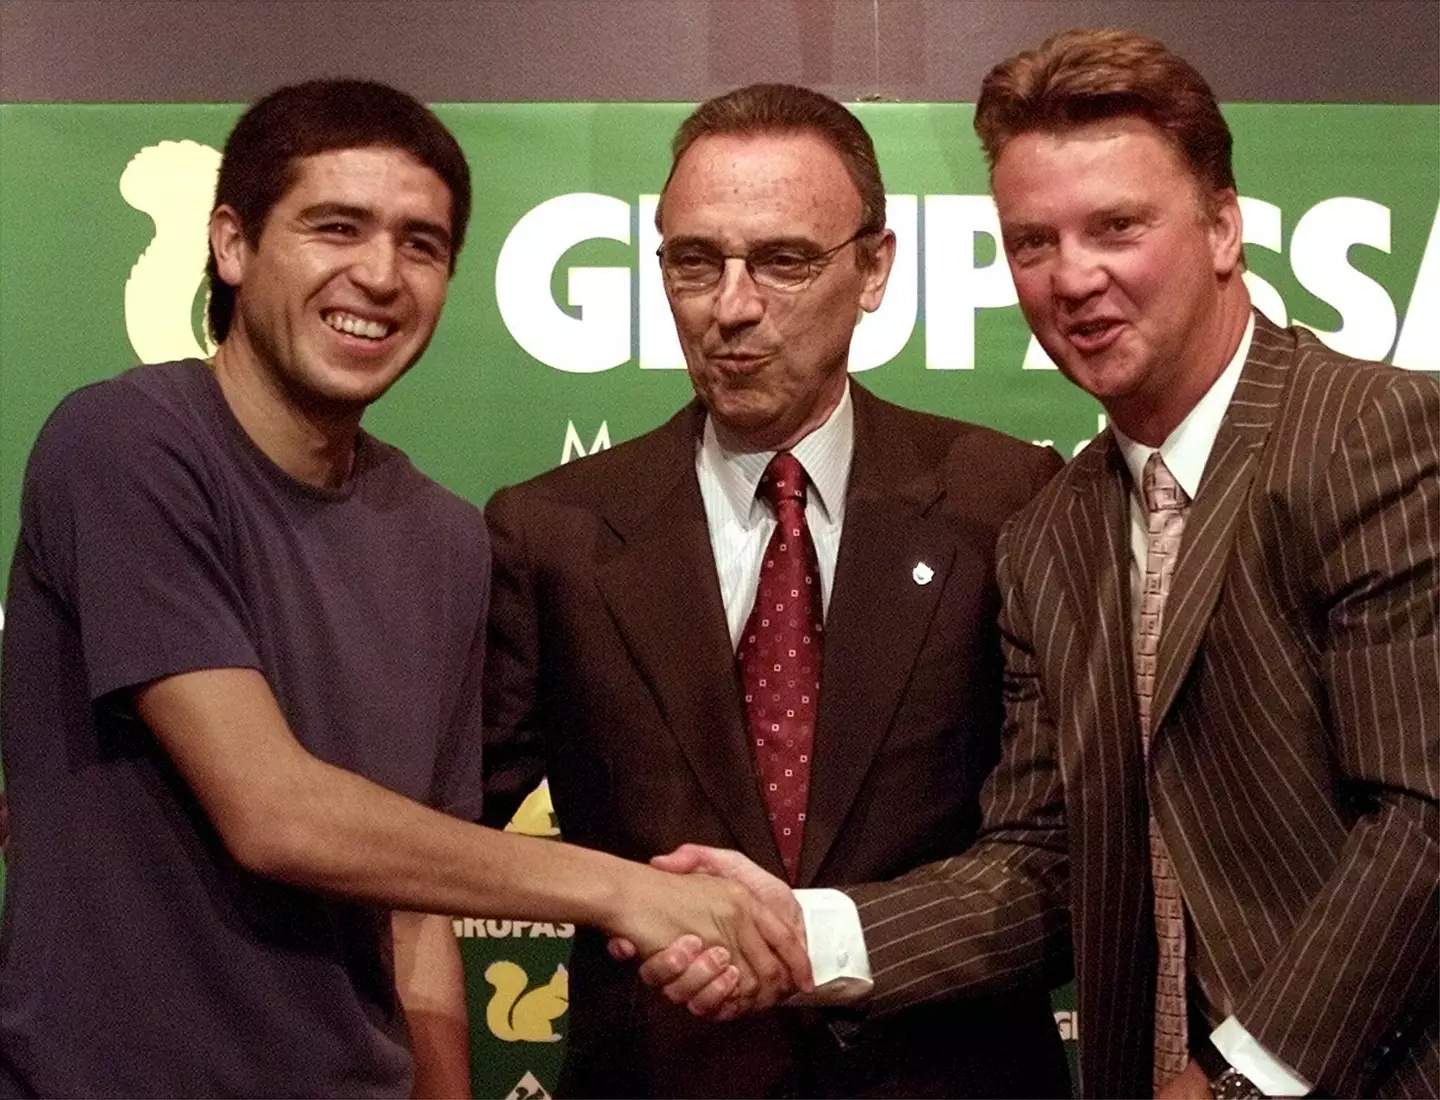 Riquelme and Van Gaal with former Barcelona president Joan Gaspart in 2002. (Image